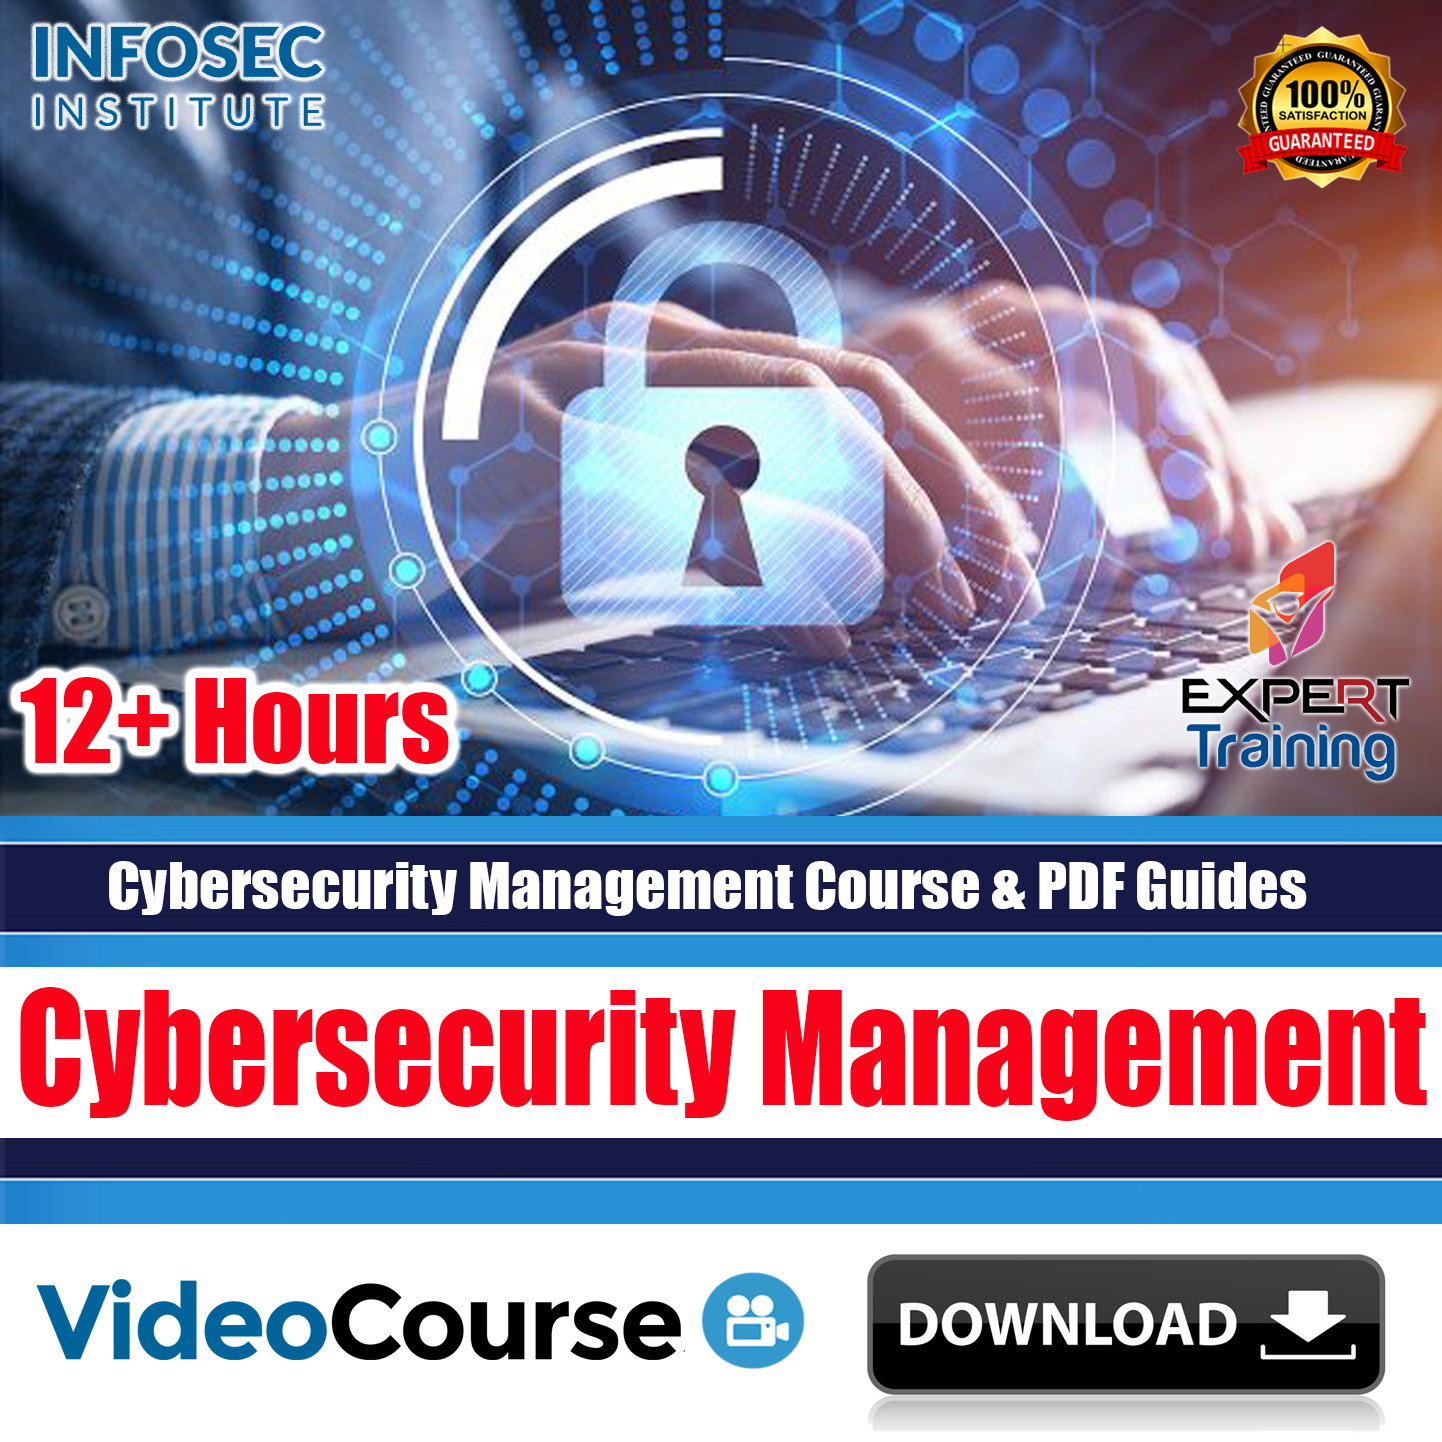 Cybersecurity Management Course & PDF Guides